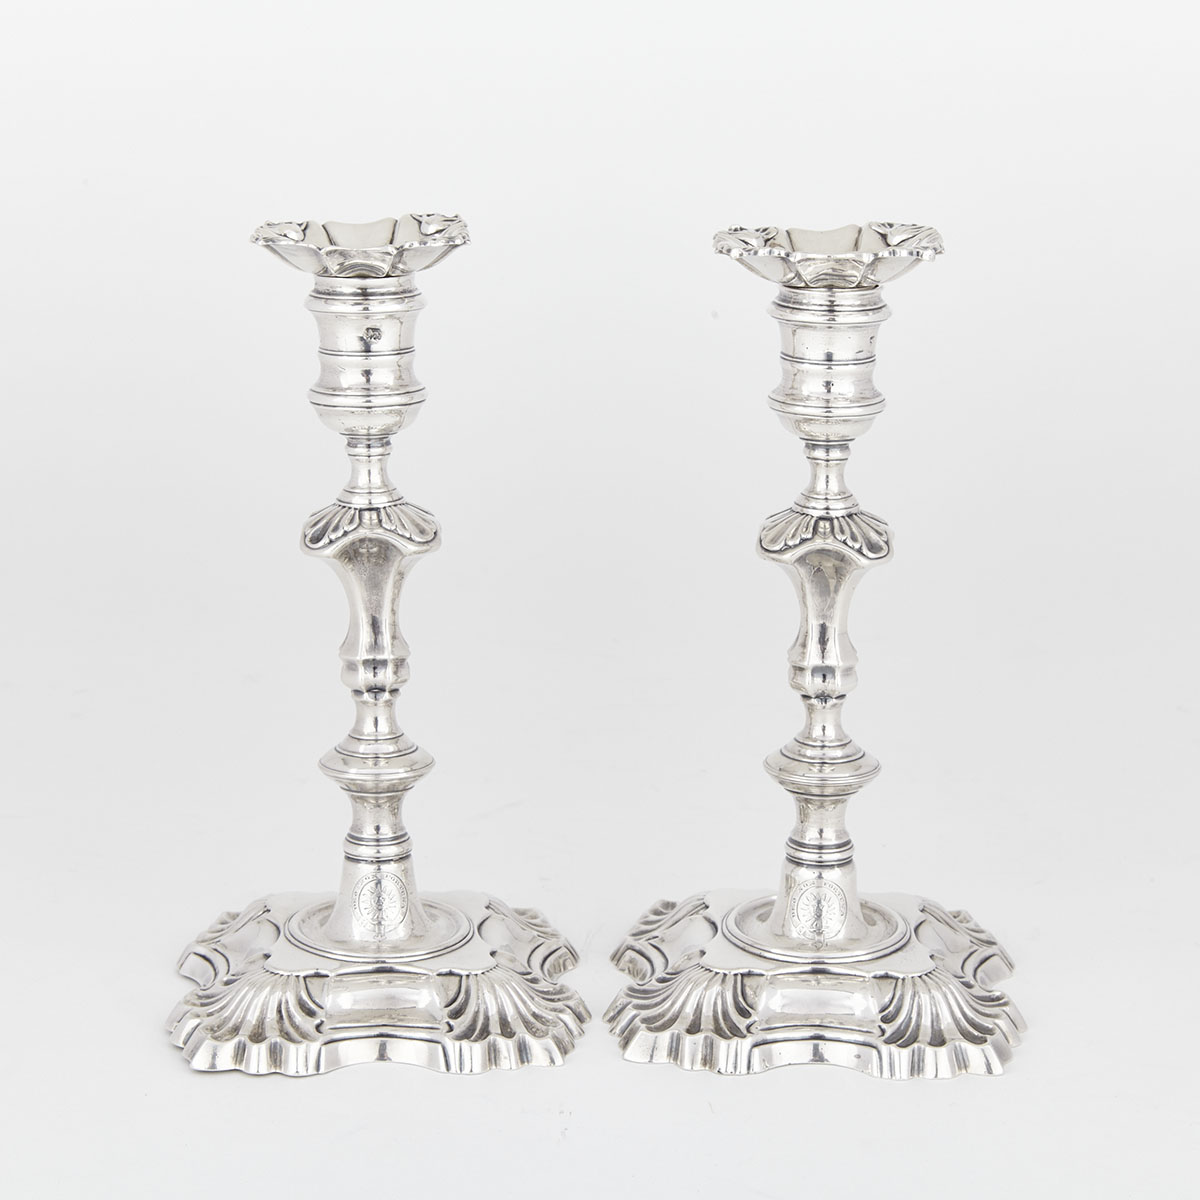 Pair of George II Silver Table Candlesticks, William and John Cafe, London, 1746 and 1752